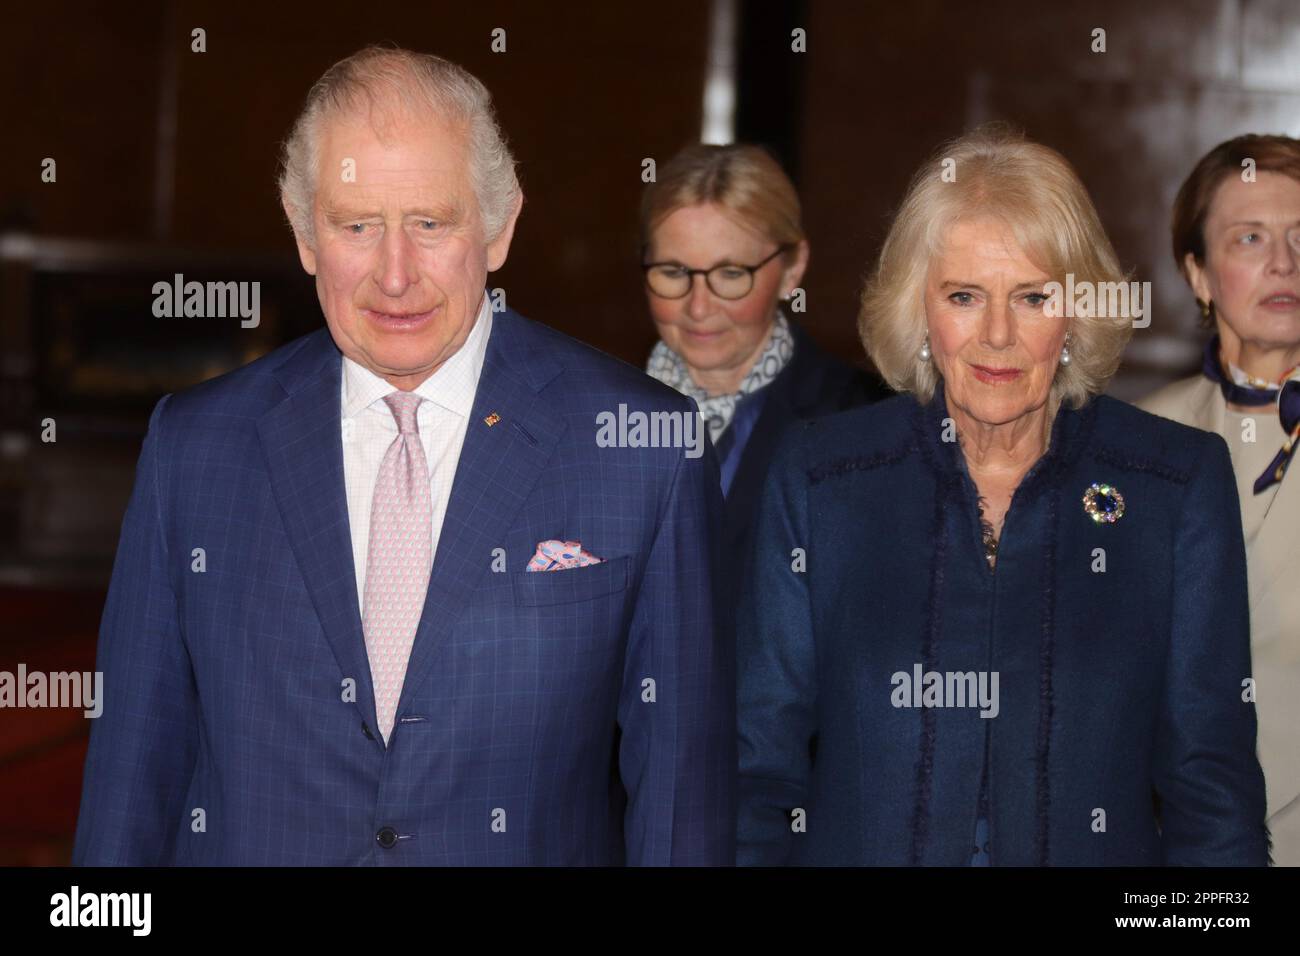 King Charles III and Queen Consort Camilla,state visit to Hamburg,31.03.2023,entry in the golden book Stock Photo